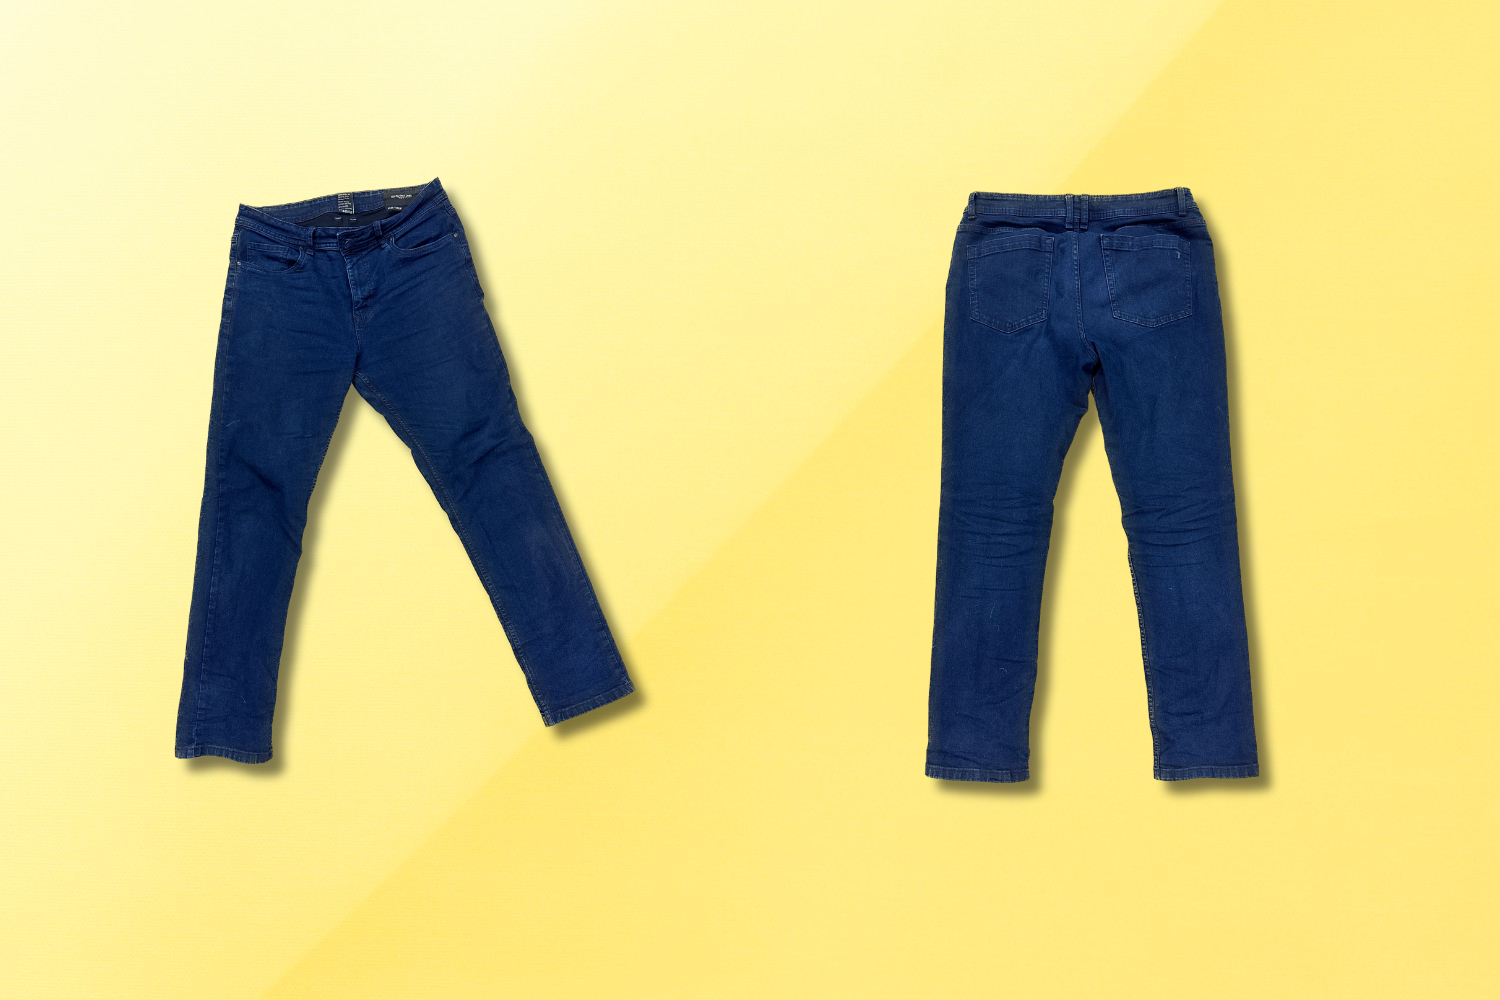 I Tested The Perfect Jeans and Here's What I Thought - OutVoices